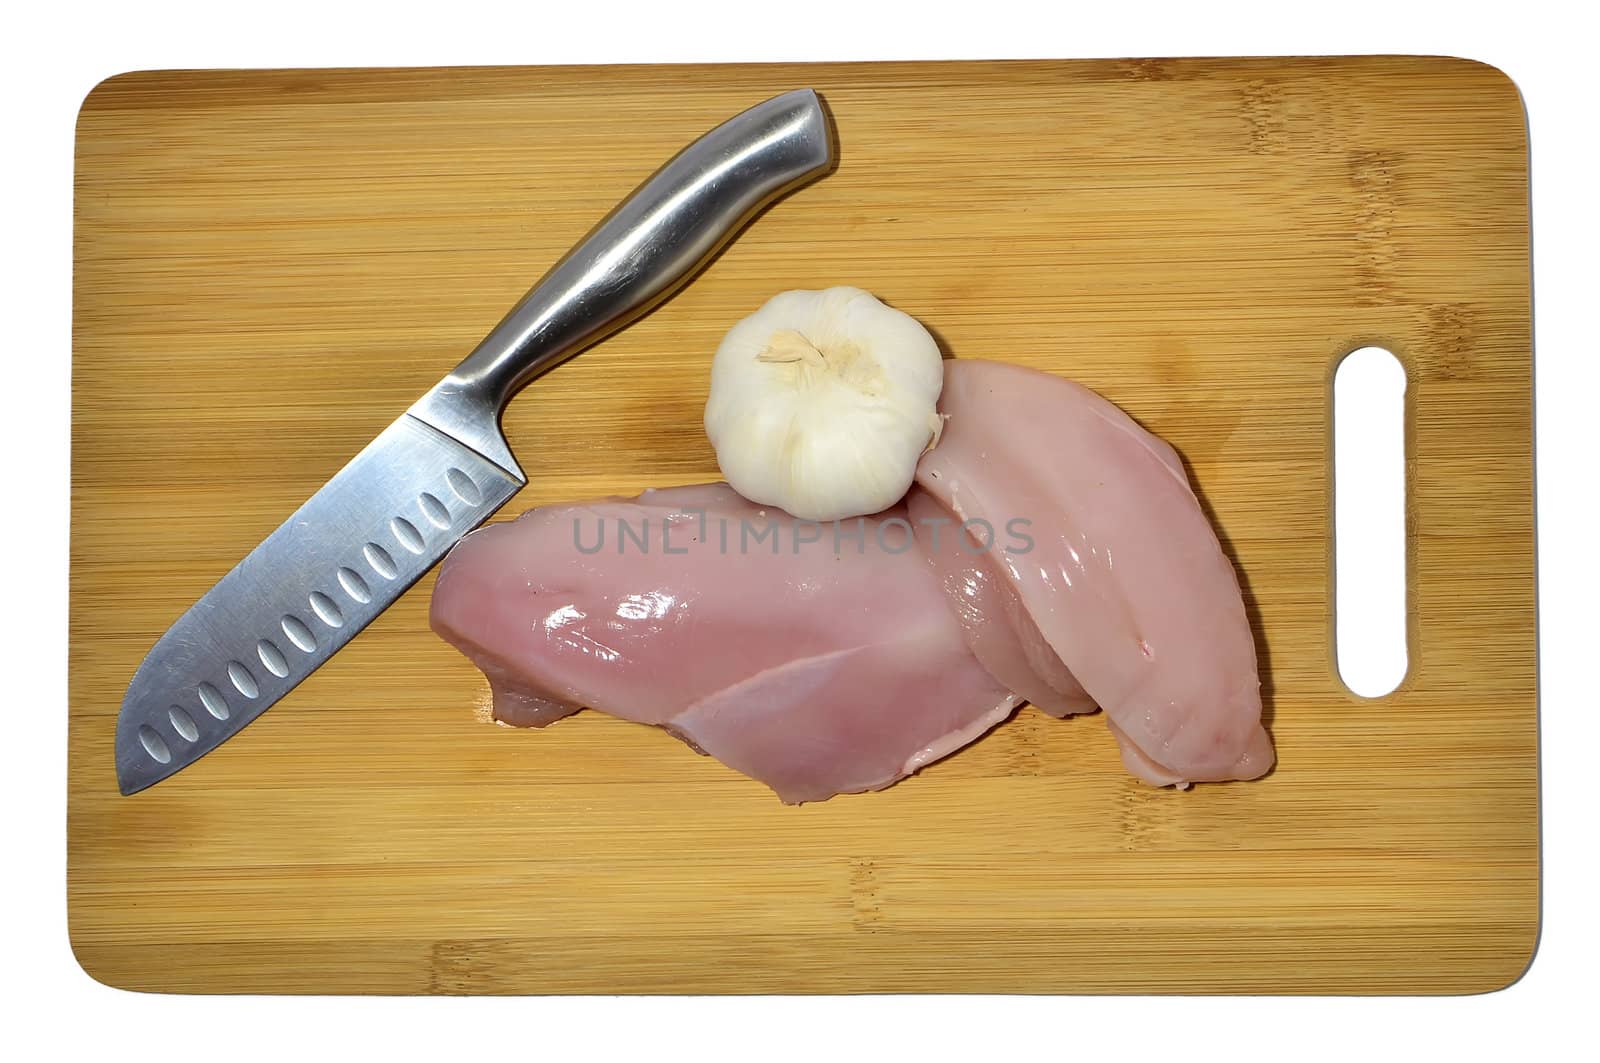 chicken, knife and garlic on a cutting board, isolated on white